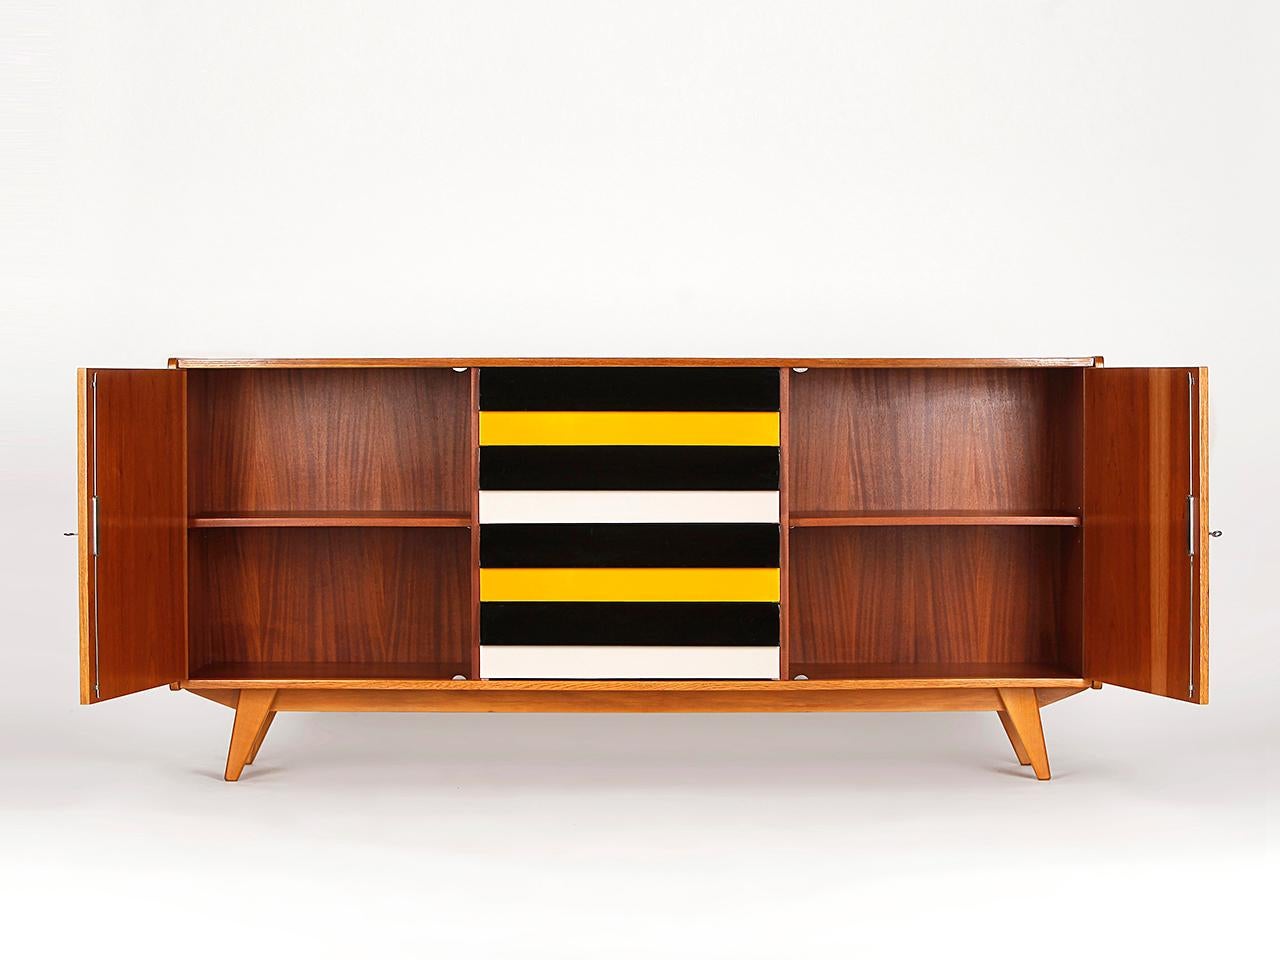 This model U-460 sideboard was designed by Jiri Jiroutek for Interier Praha in former Czechoslovakia. Produced in the 1960s. Completely restored. Excellent condition. It is an early model with wooden drawers. Delivery time 3-4 weeks.